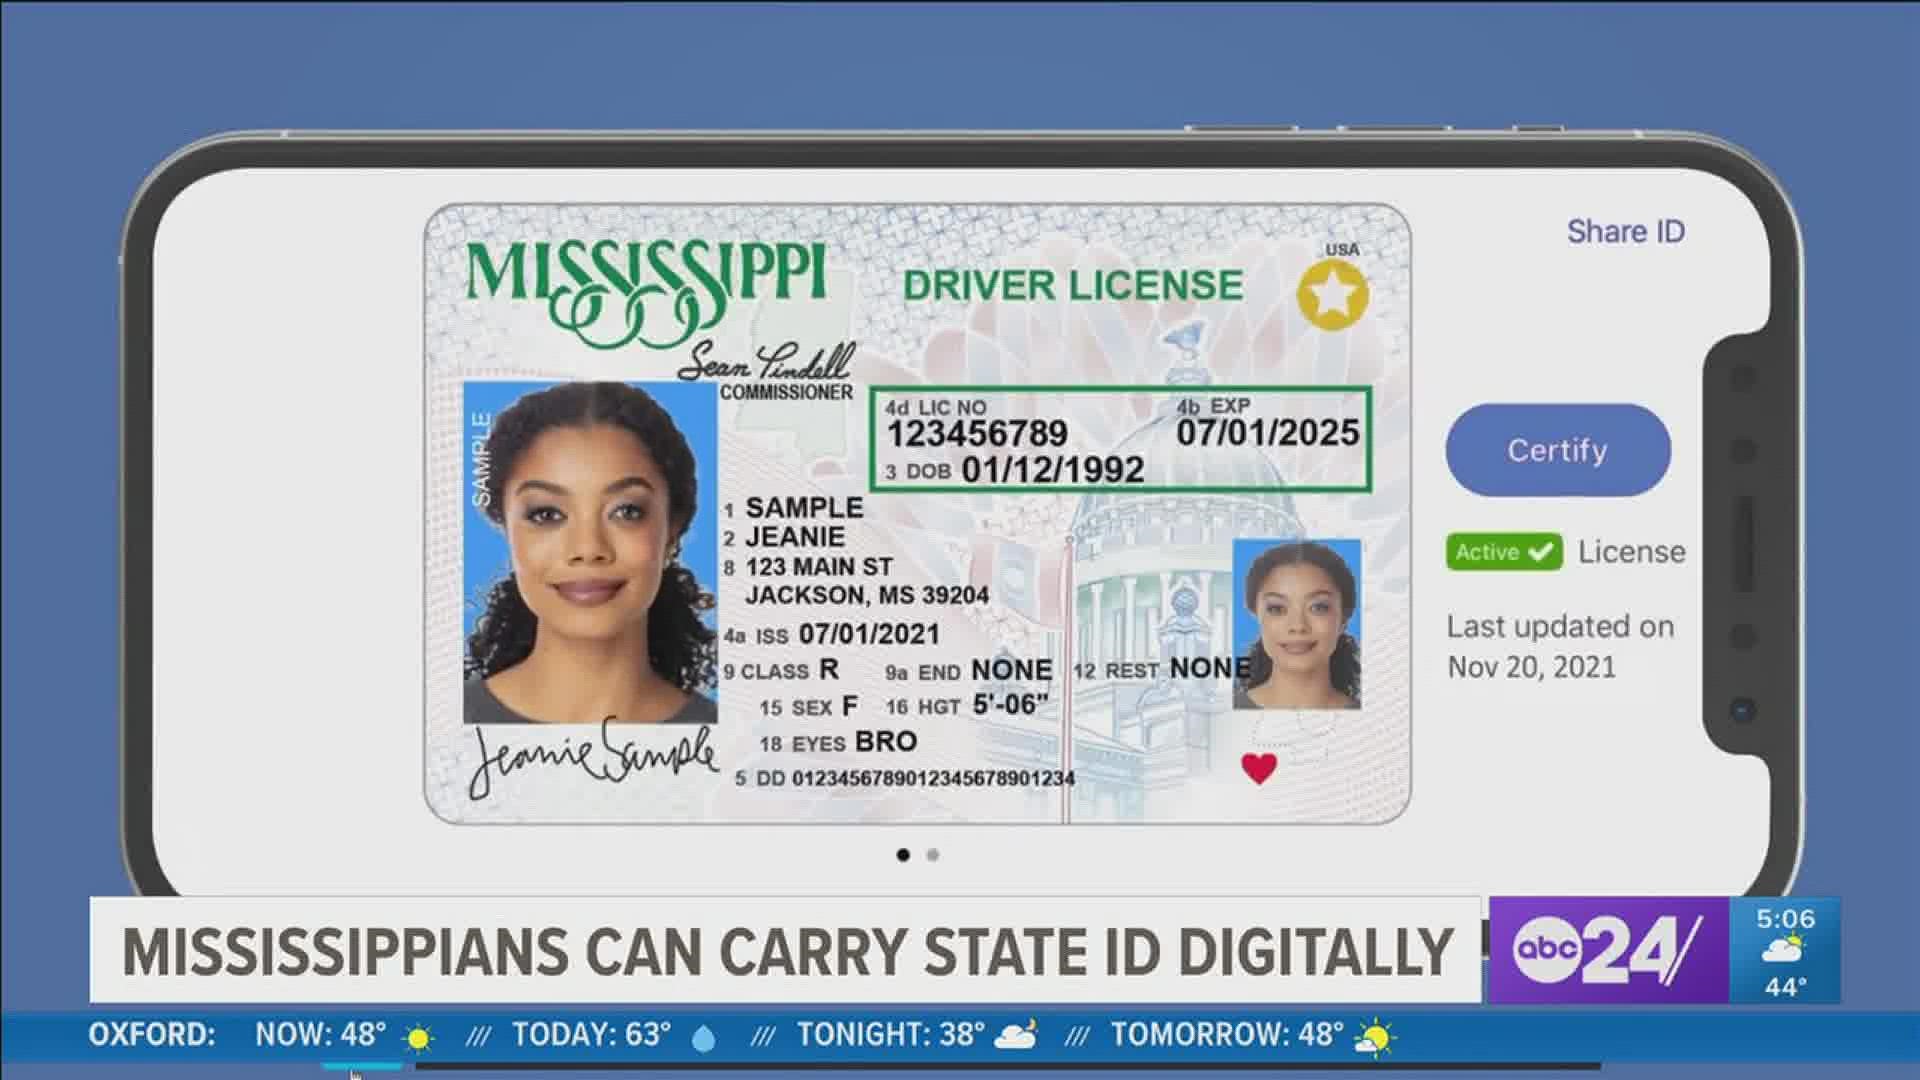 The Mississippi Mobile ID is a digital version of your physical driver's license that allows you to use your cell phone as a legal form of identification.